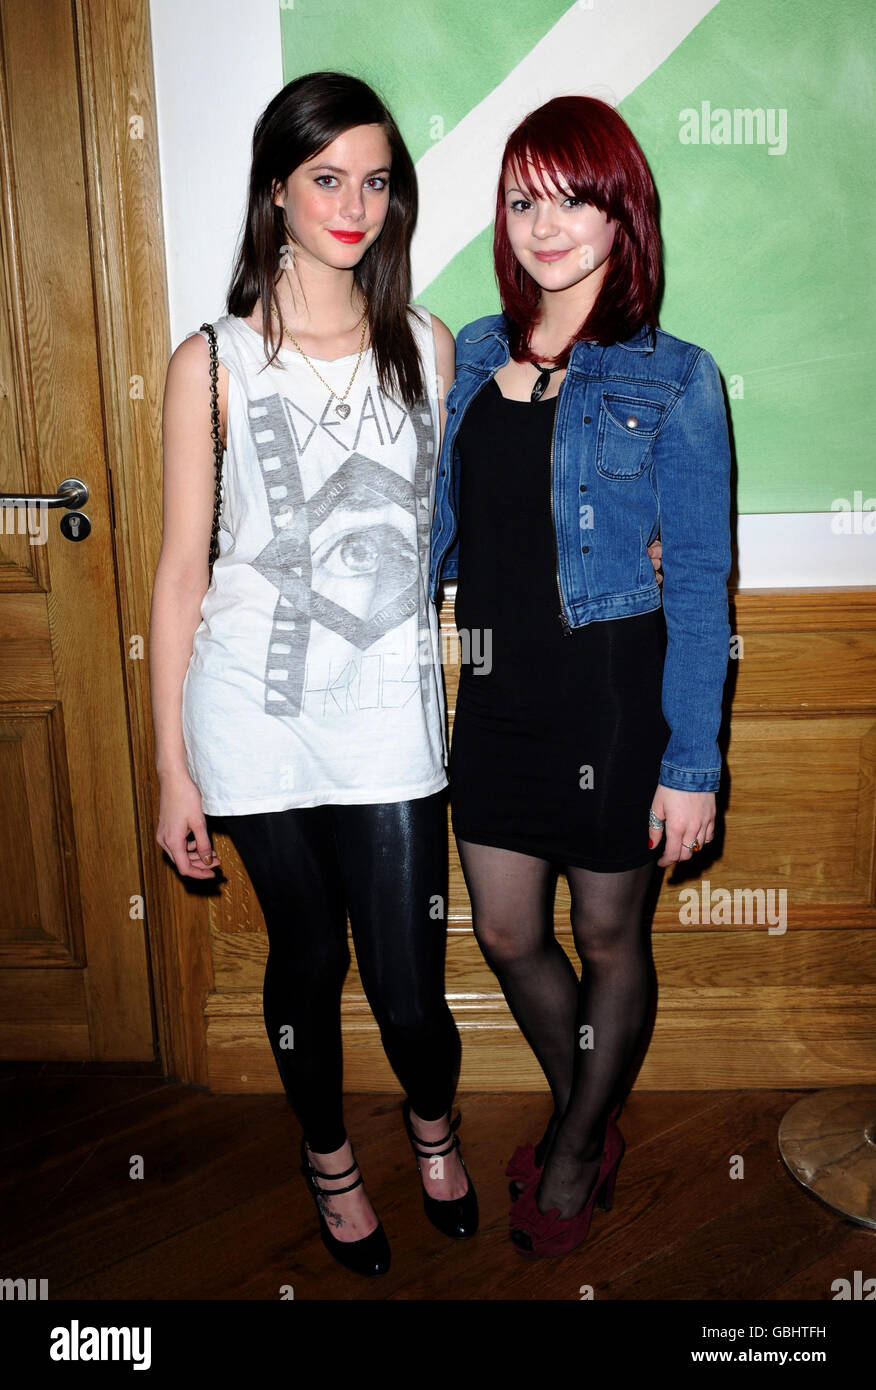 Kaya Scodelario (left) and Kathryn Prescott of TV show Skins arrive for the VIP screening of I Love You, Man at the Soho Hotel in central London. Stock Photo